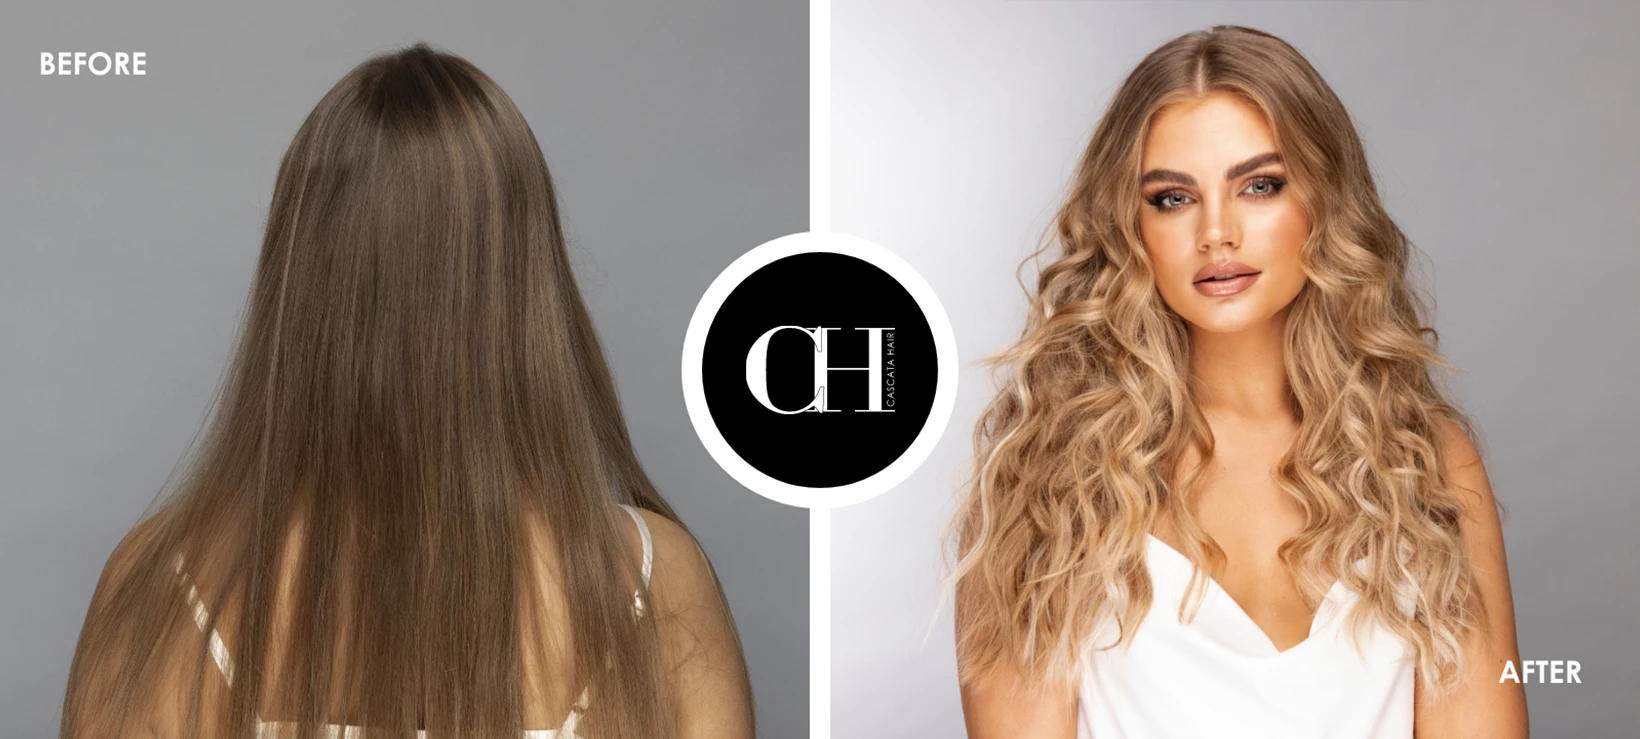 Before & After image of Cascata Hair Extensions - Blonde Hair